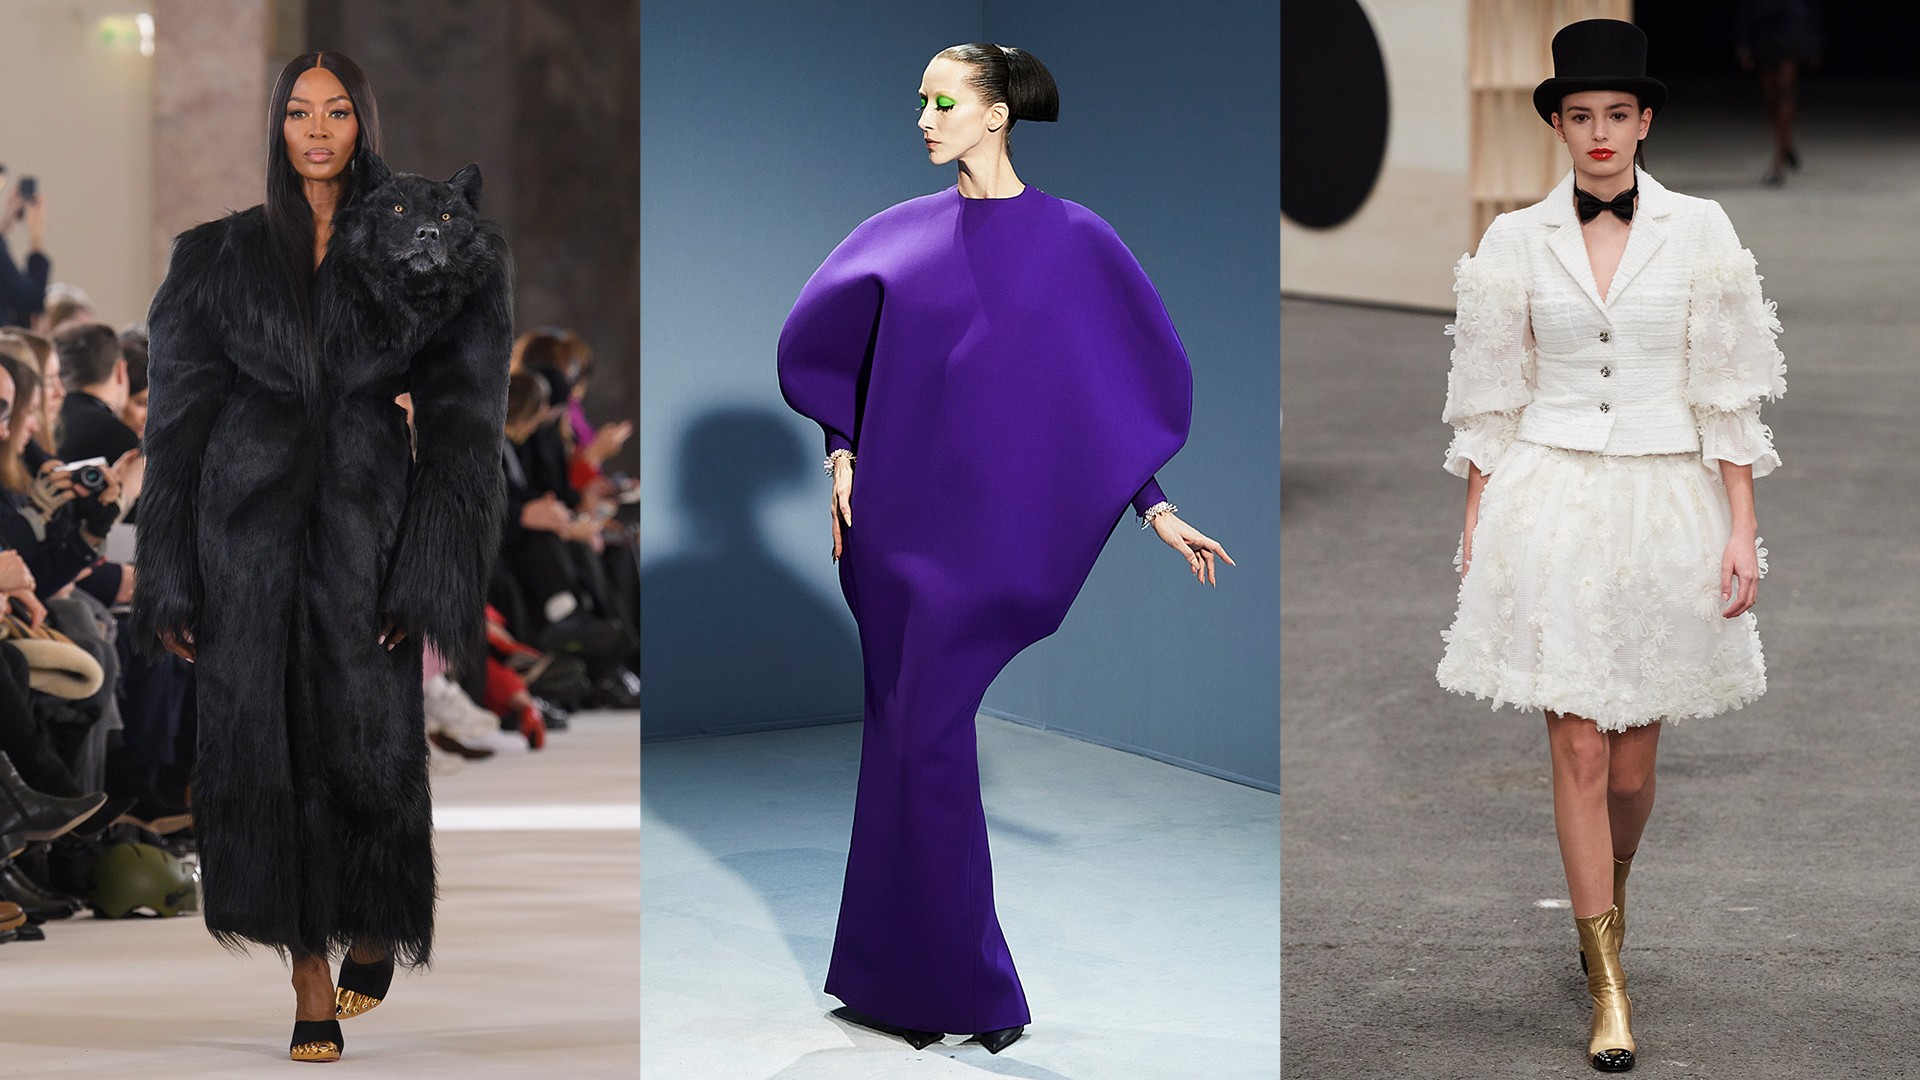 Why Balenciaga sees opportunity in couture